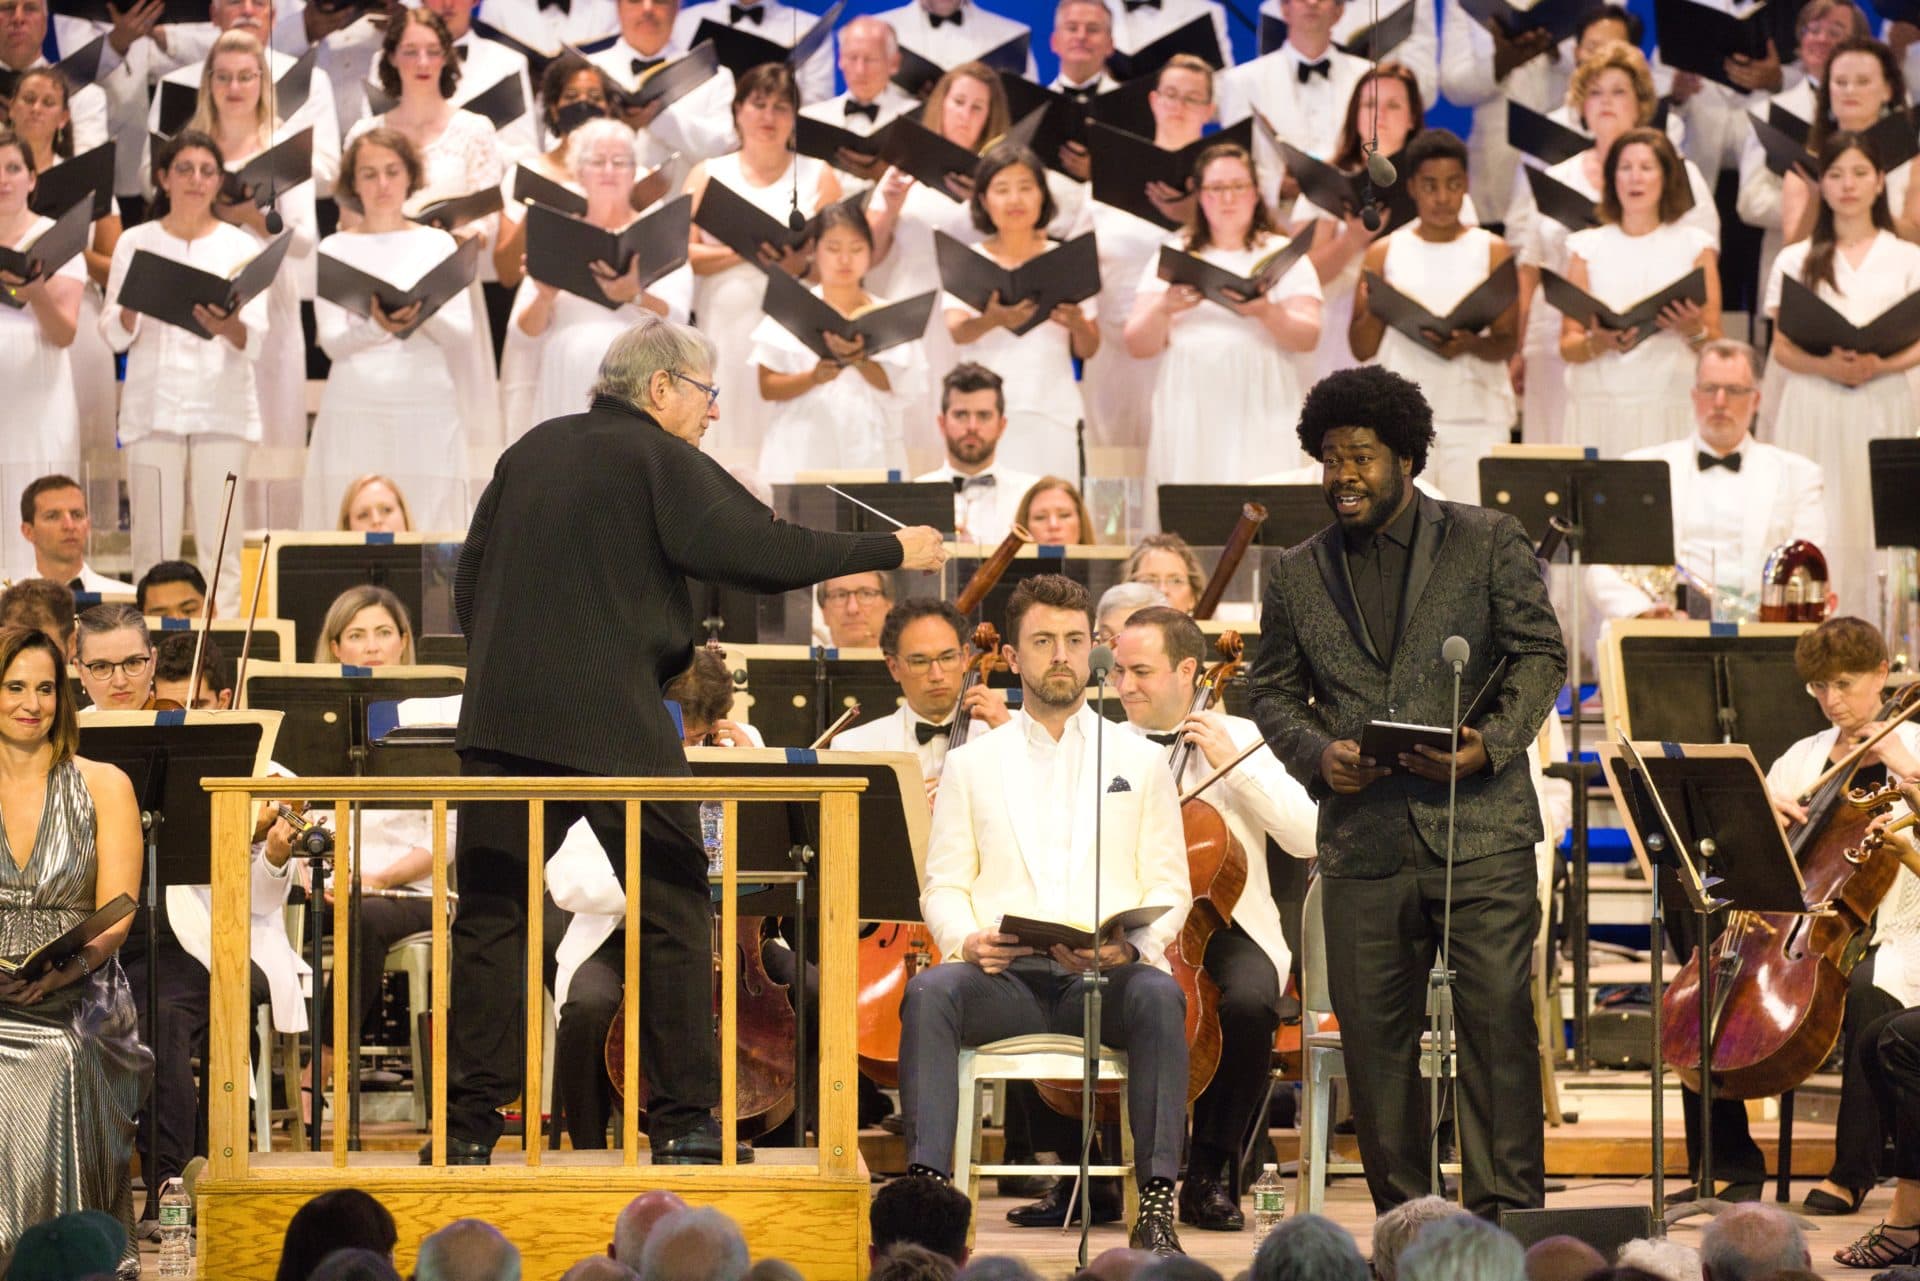 Conductor Michael Tilson Thomas and bass baritone Dashon Burton with the BSO and Tanglewood Festival Chorus during a performance of Beethoven's Symphony No. 9 at Tanglewood. (Courtesy Hilary Scott)